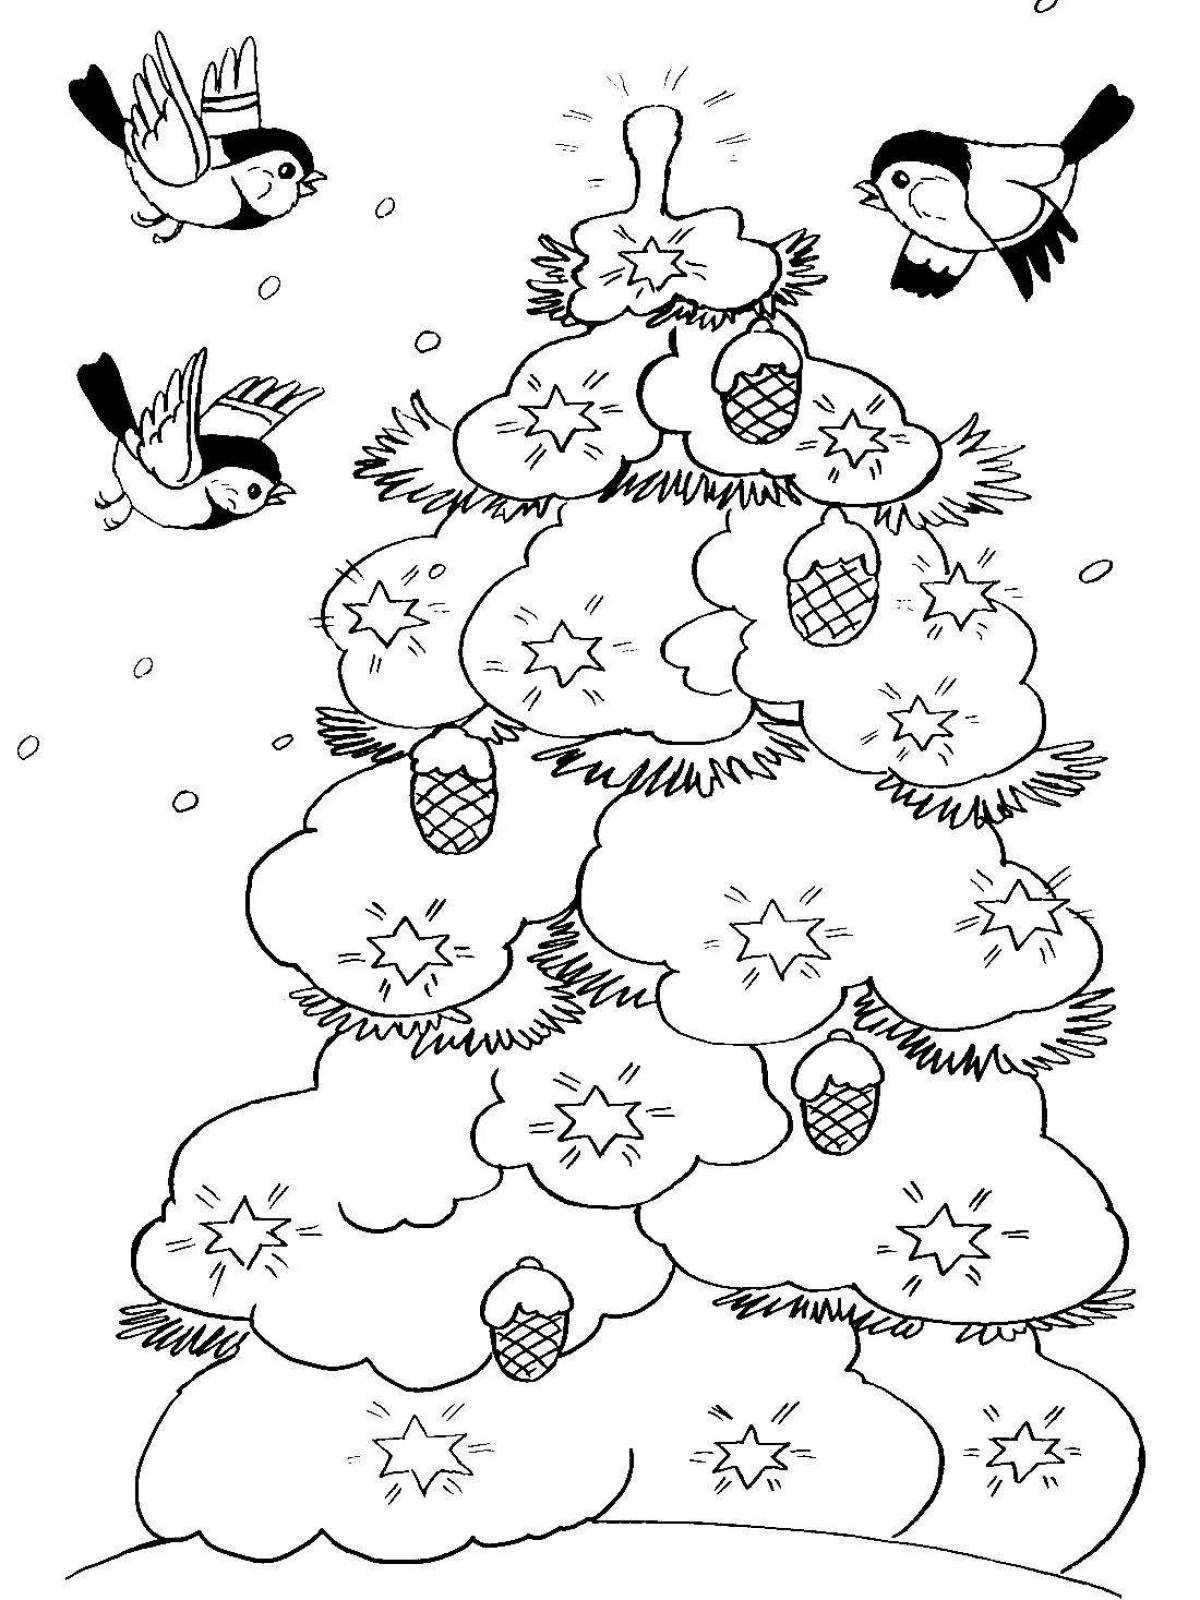 Merry winter coloring book for kids